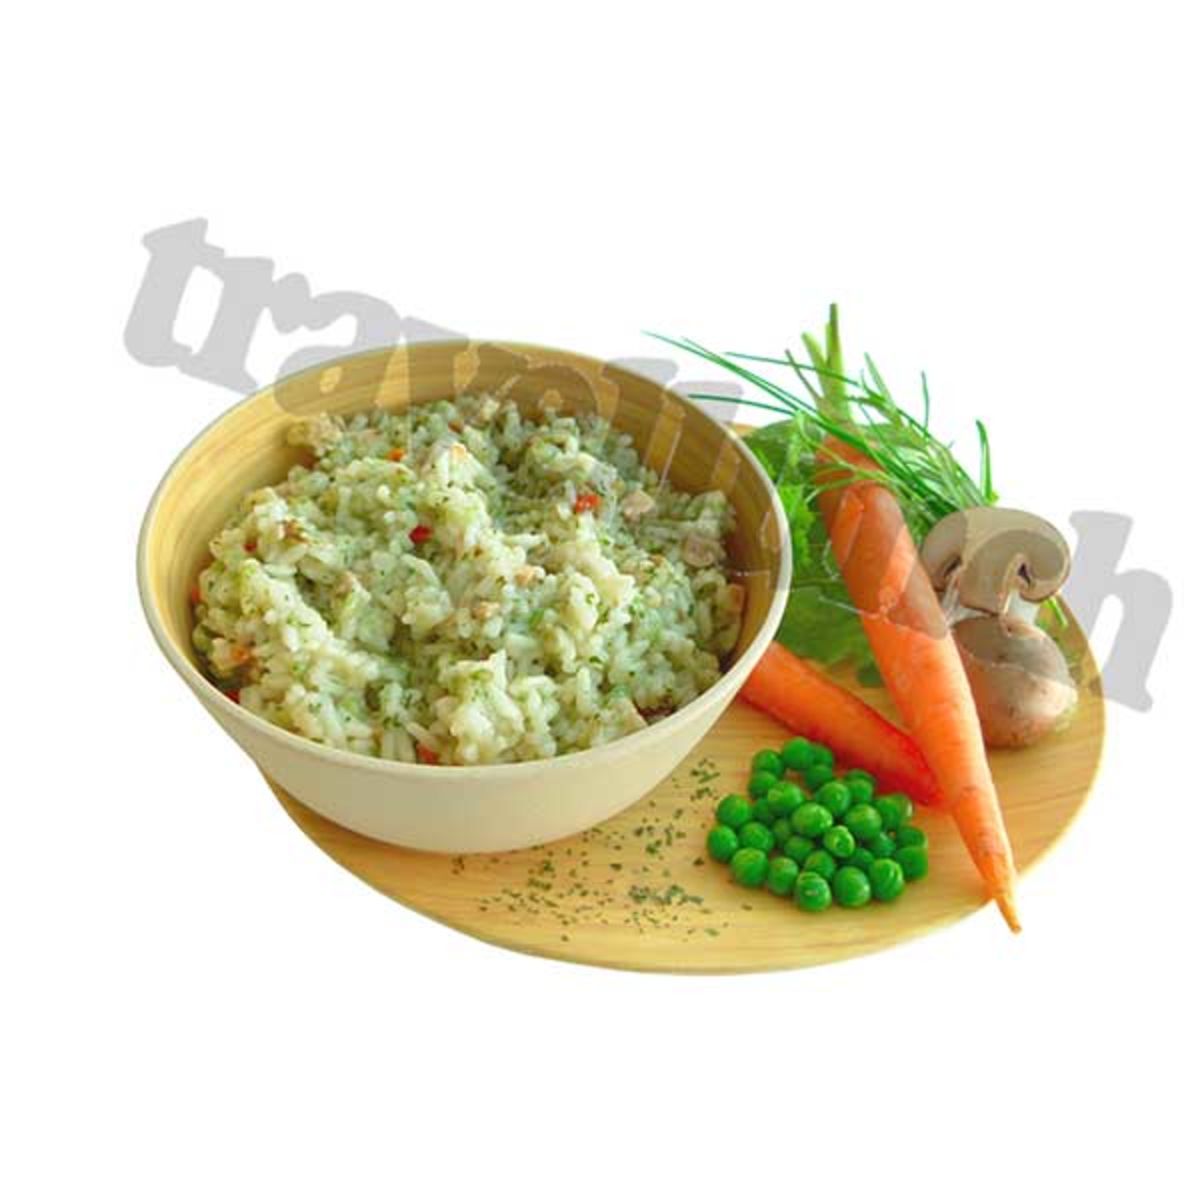 Chicken risotto with vegetables - Double serving